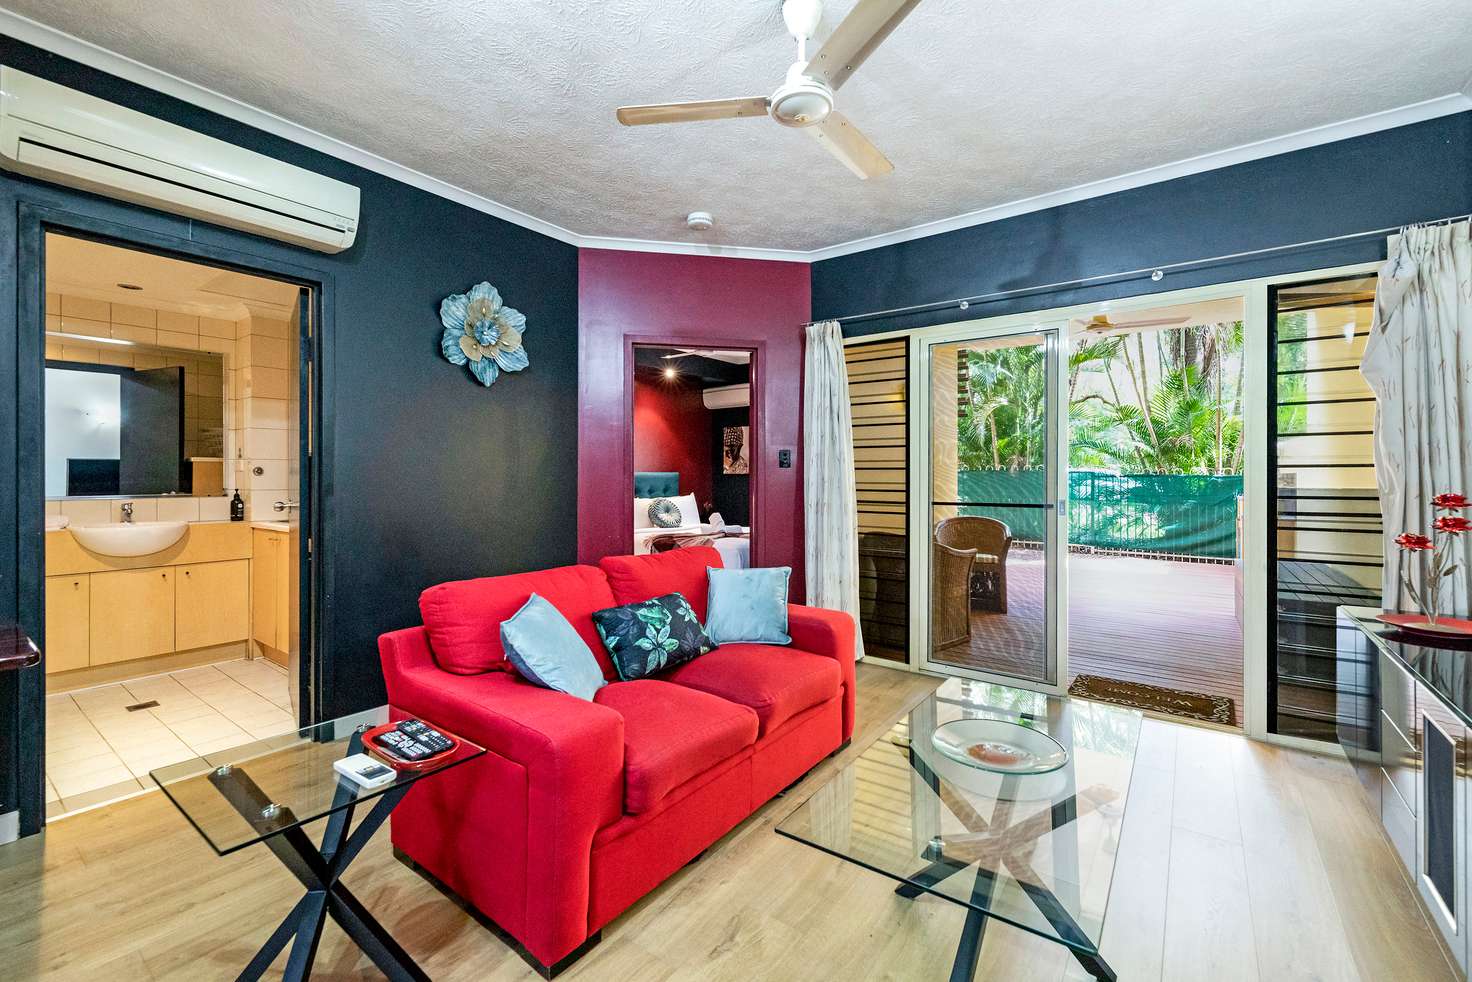 Main view of Homely apartment listing, 5/16-18 Mackillop Street, Parap NT 820